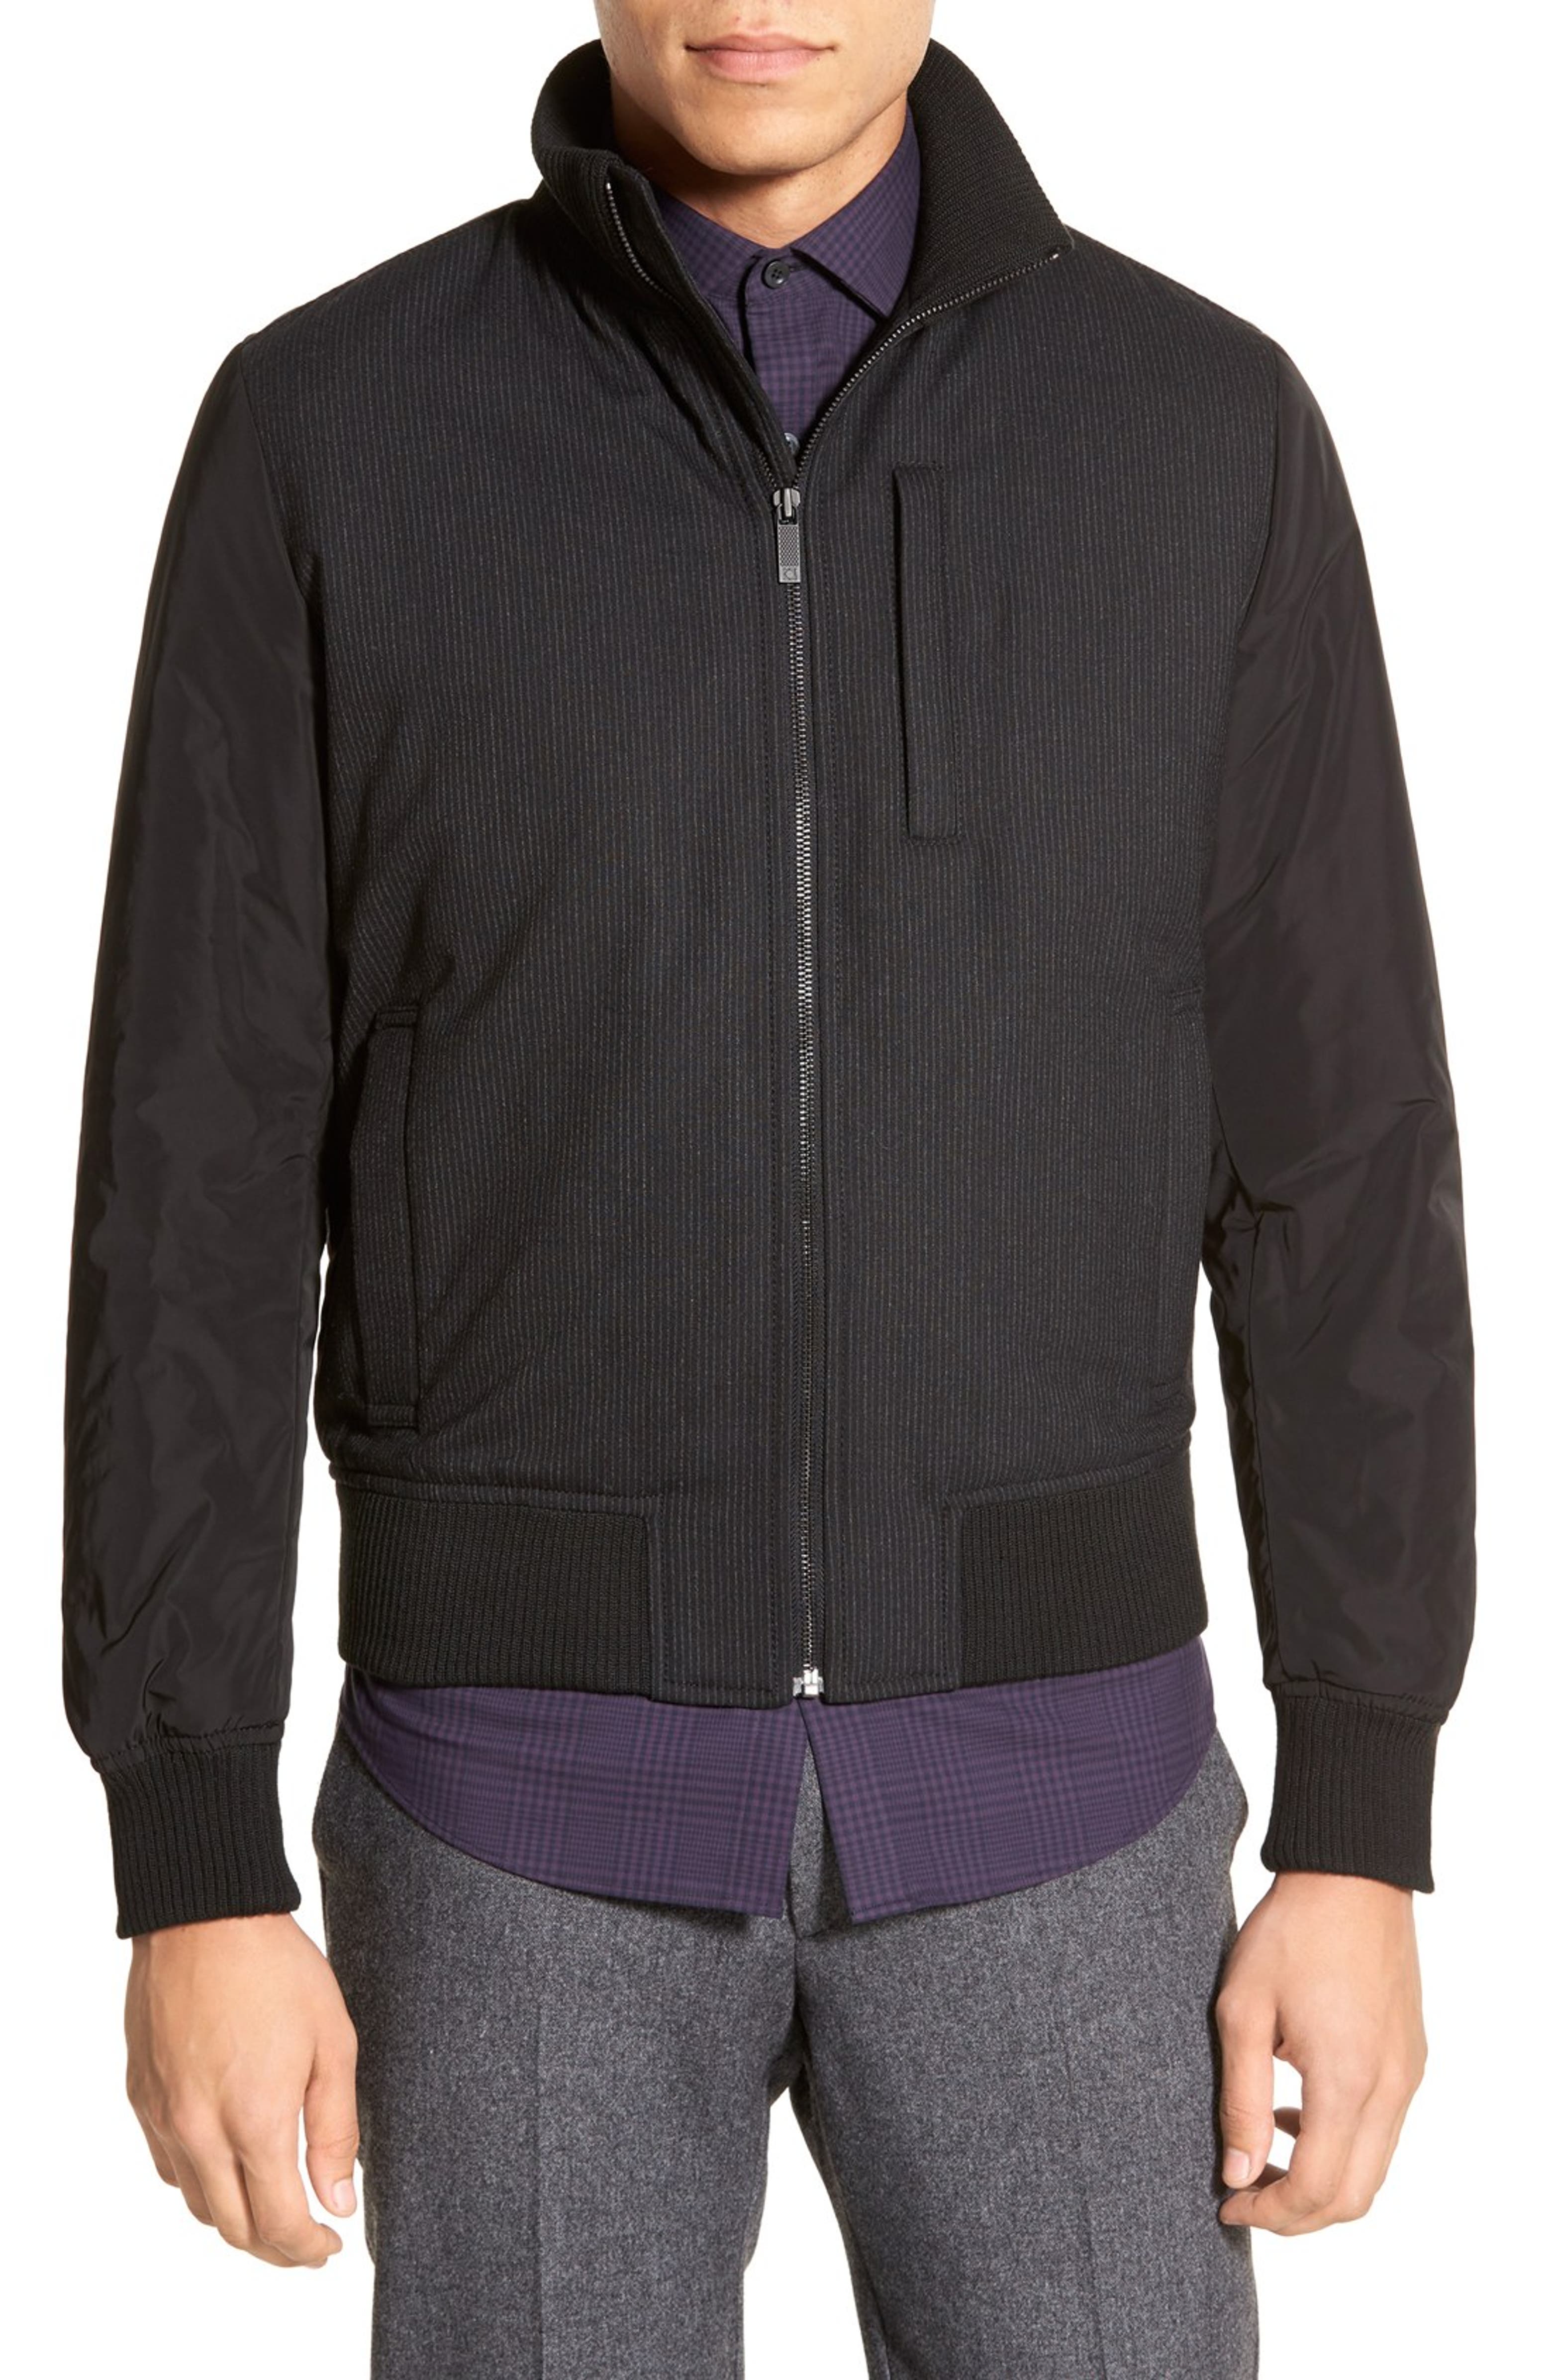 Kenneth Cole Black Label Pinstripe Wool Bomber Jacket with Nylon ...